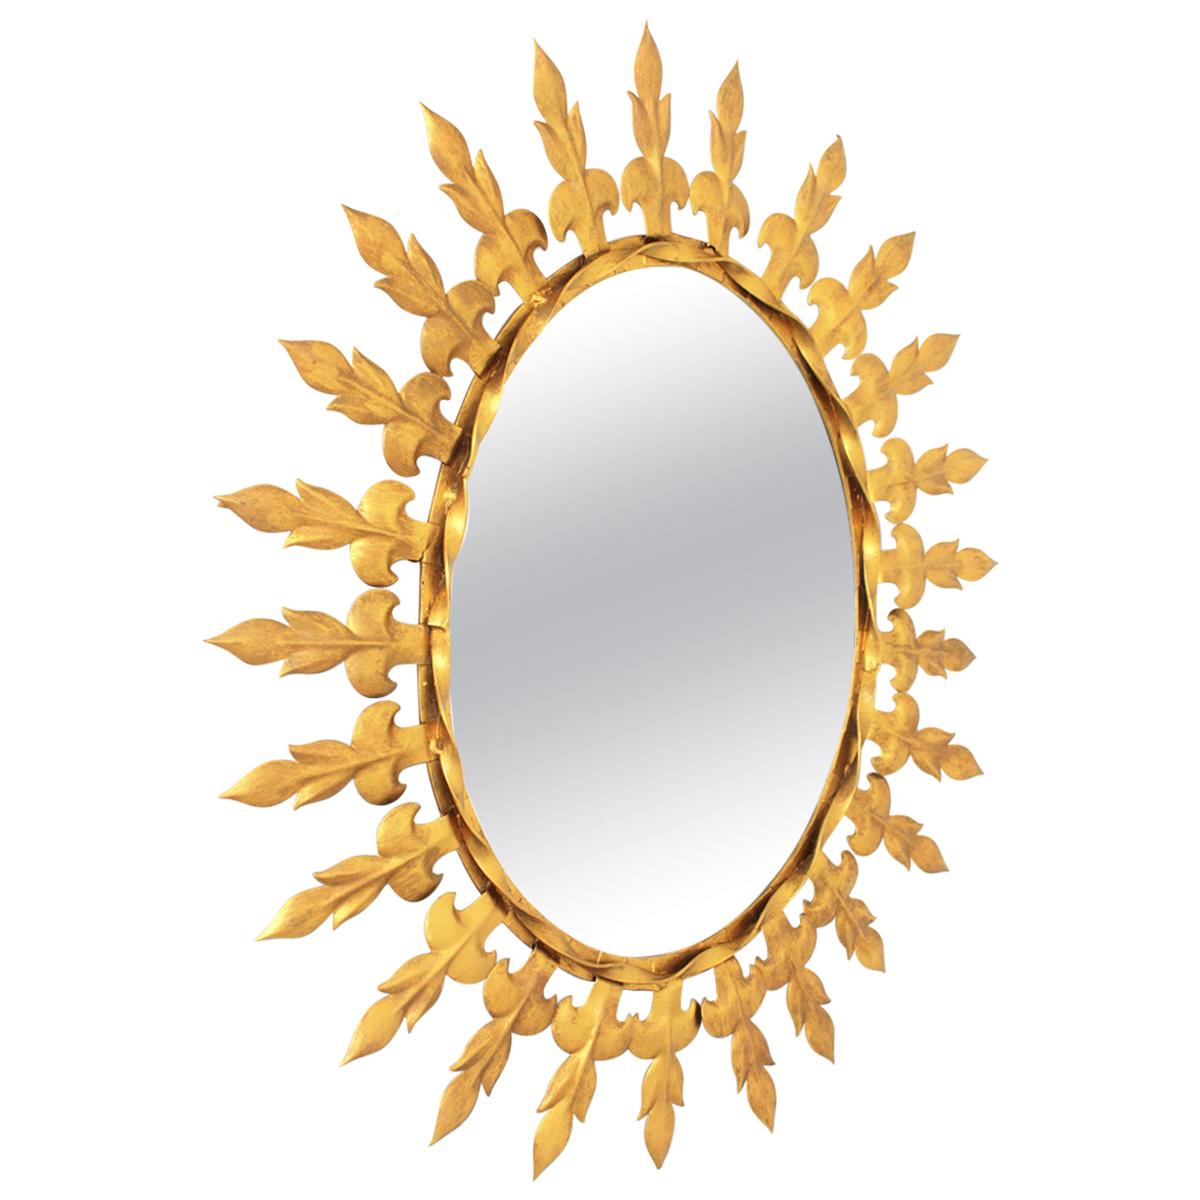 Sunburst Oval Wall Mirror with Fleur de Lys Frame in Gilt Iron, Spain, 1950s
Mid- century Modern Sunburst Mirror in Gilt Metal. 
The frame is comprised by alternating leaves or Fleur de Lys motifs joined between them by a twisted strip. 
This wall